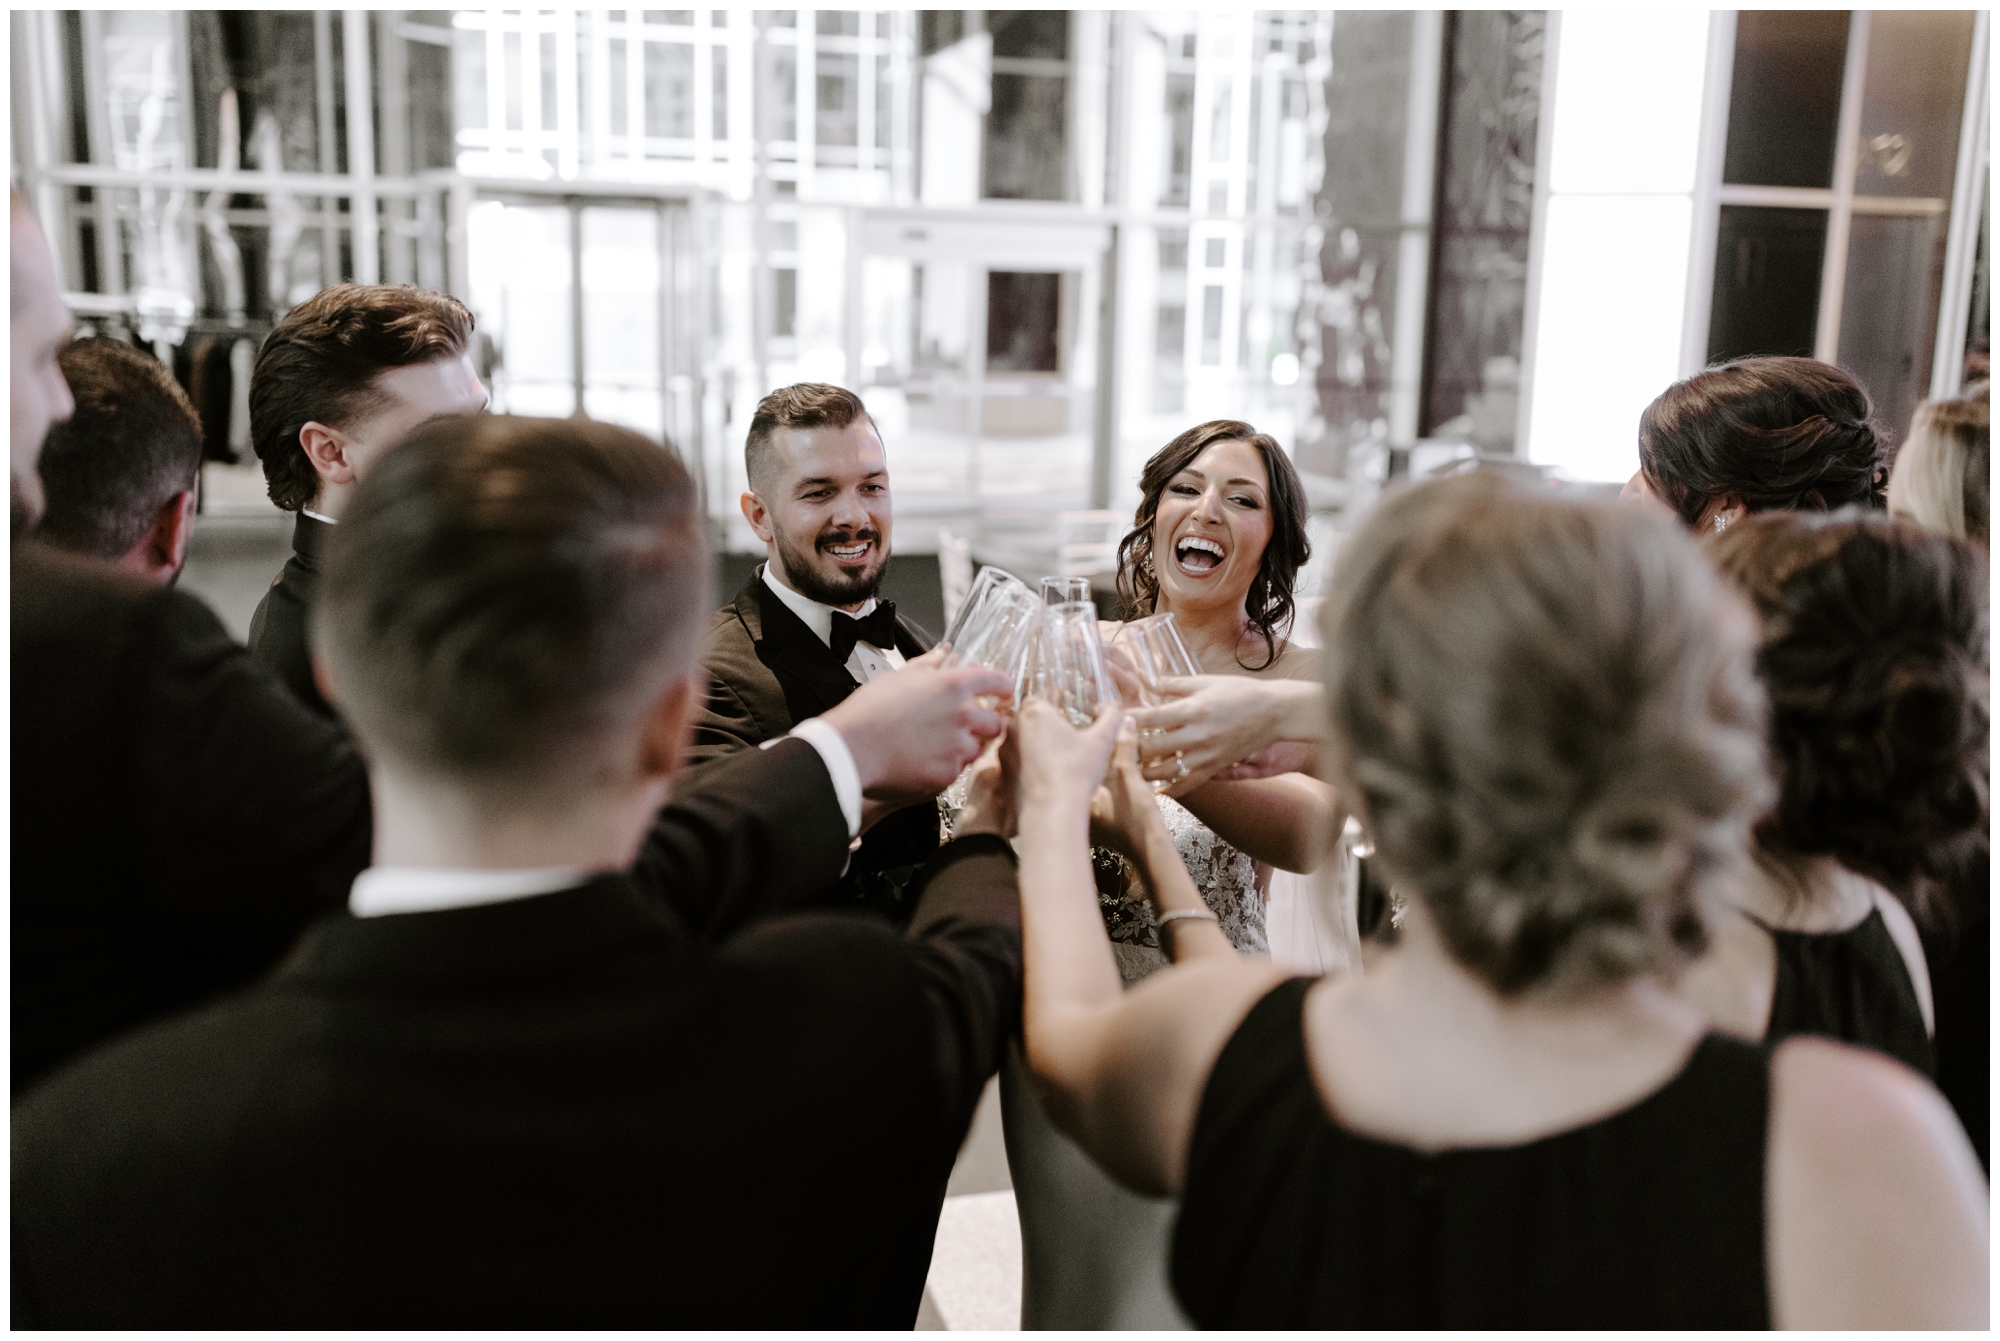 PPG Wintergarden Wedding photographed by Mariah Treiber Photography